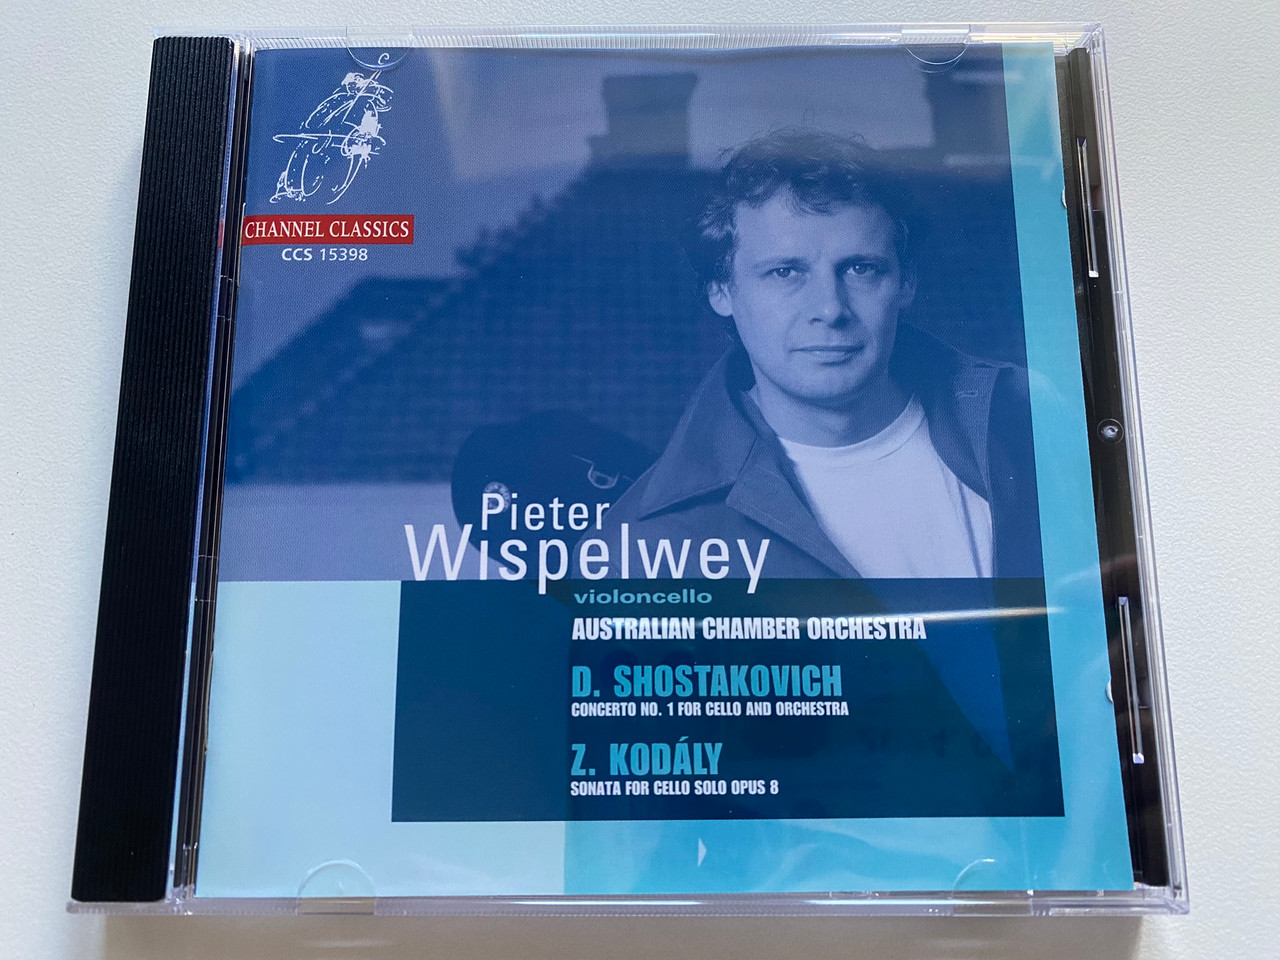 https://cdn11.bigcommerce.com/s-62bdpkt7pb/products/0/images/328098/Pieter_Wispelwey_violoncello_Australian_Chamber_Orchestra_-_D._Schostakovich_Concerto_No._1_For_Cello_And_Orchestra_Z._Kodaly_Sonata_For_Cello_Solo_Opus_8_Channel_Classics_Audio_CD_19_1__23766.1710833385.1280.1280.jpg?c=2